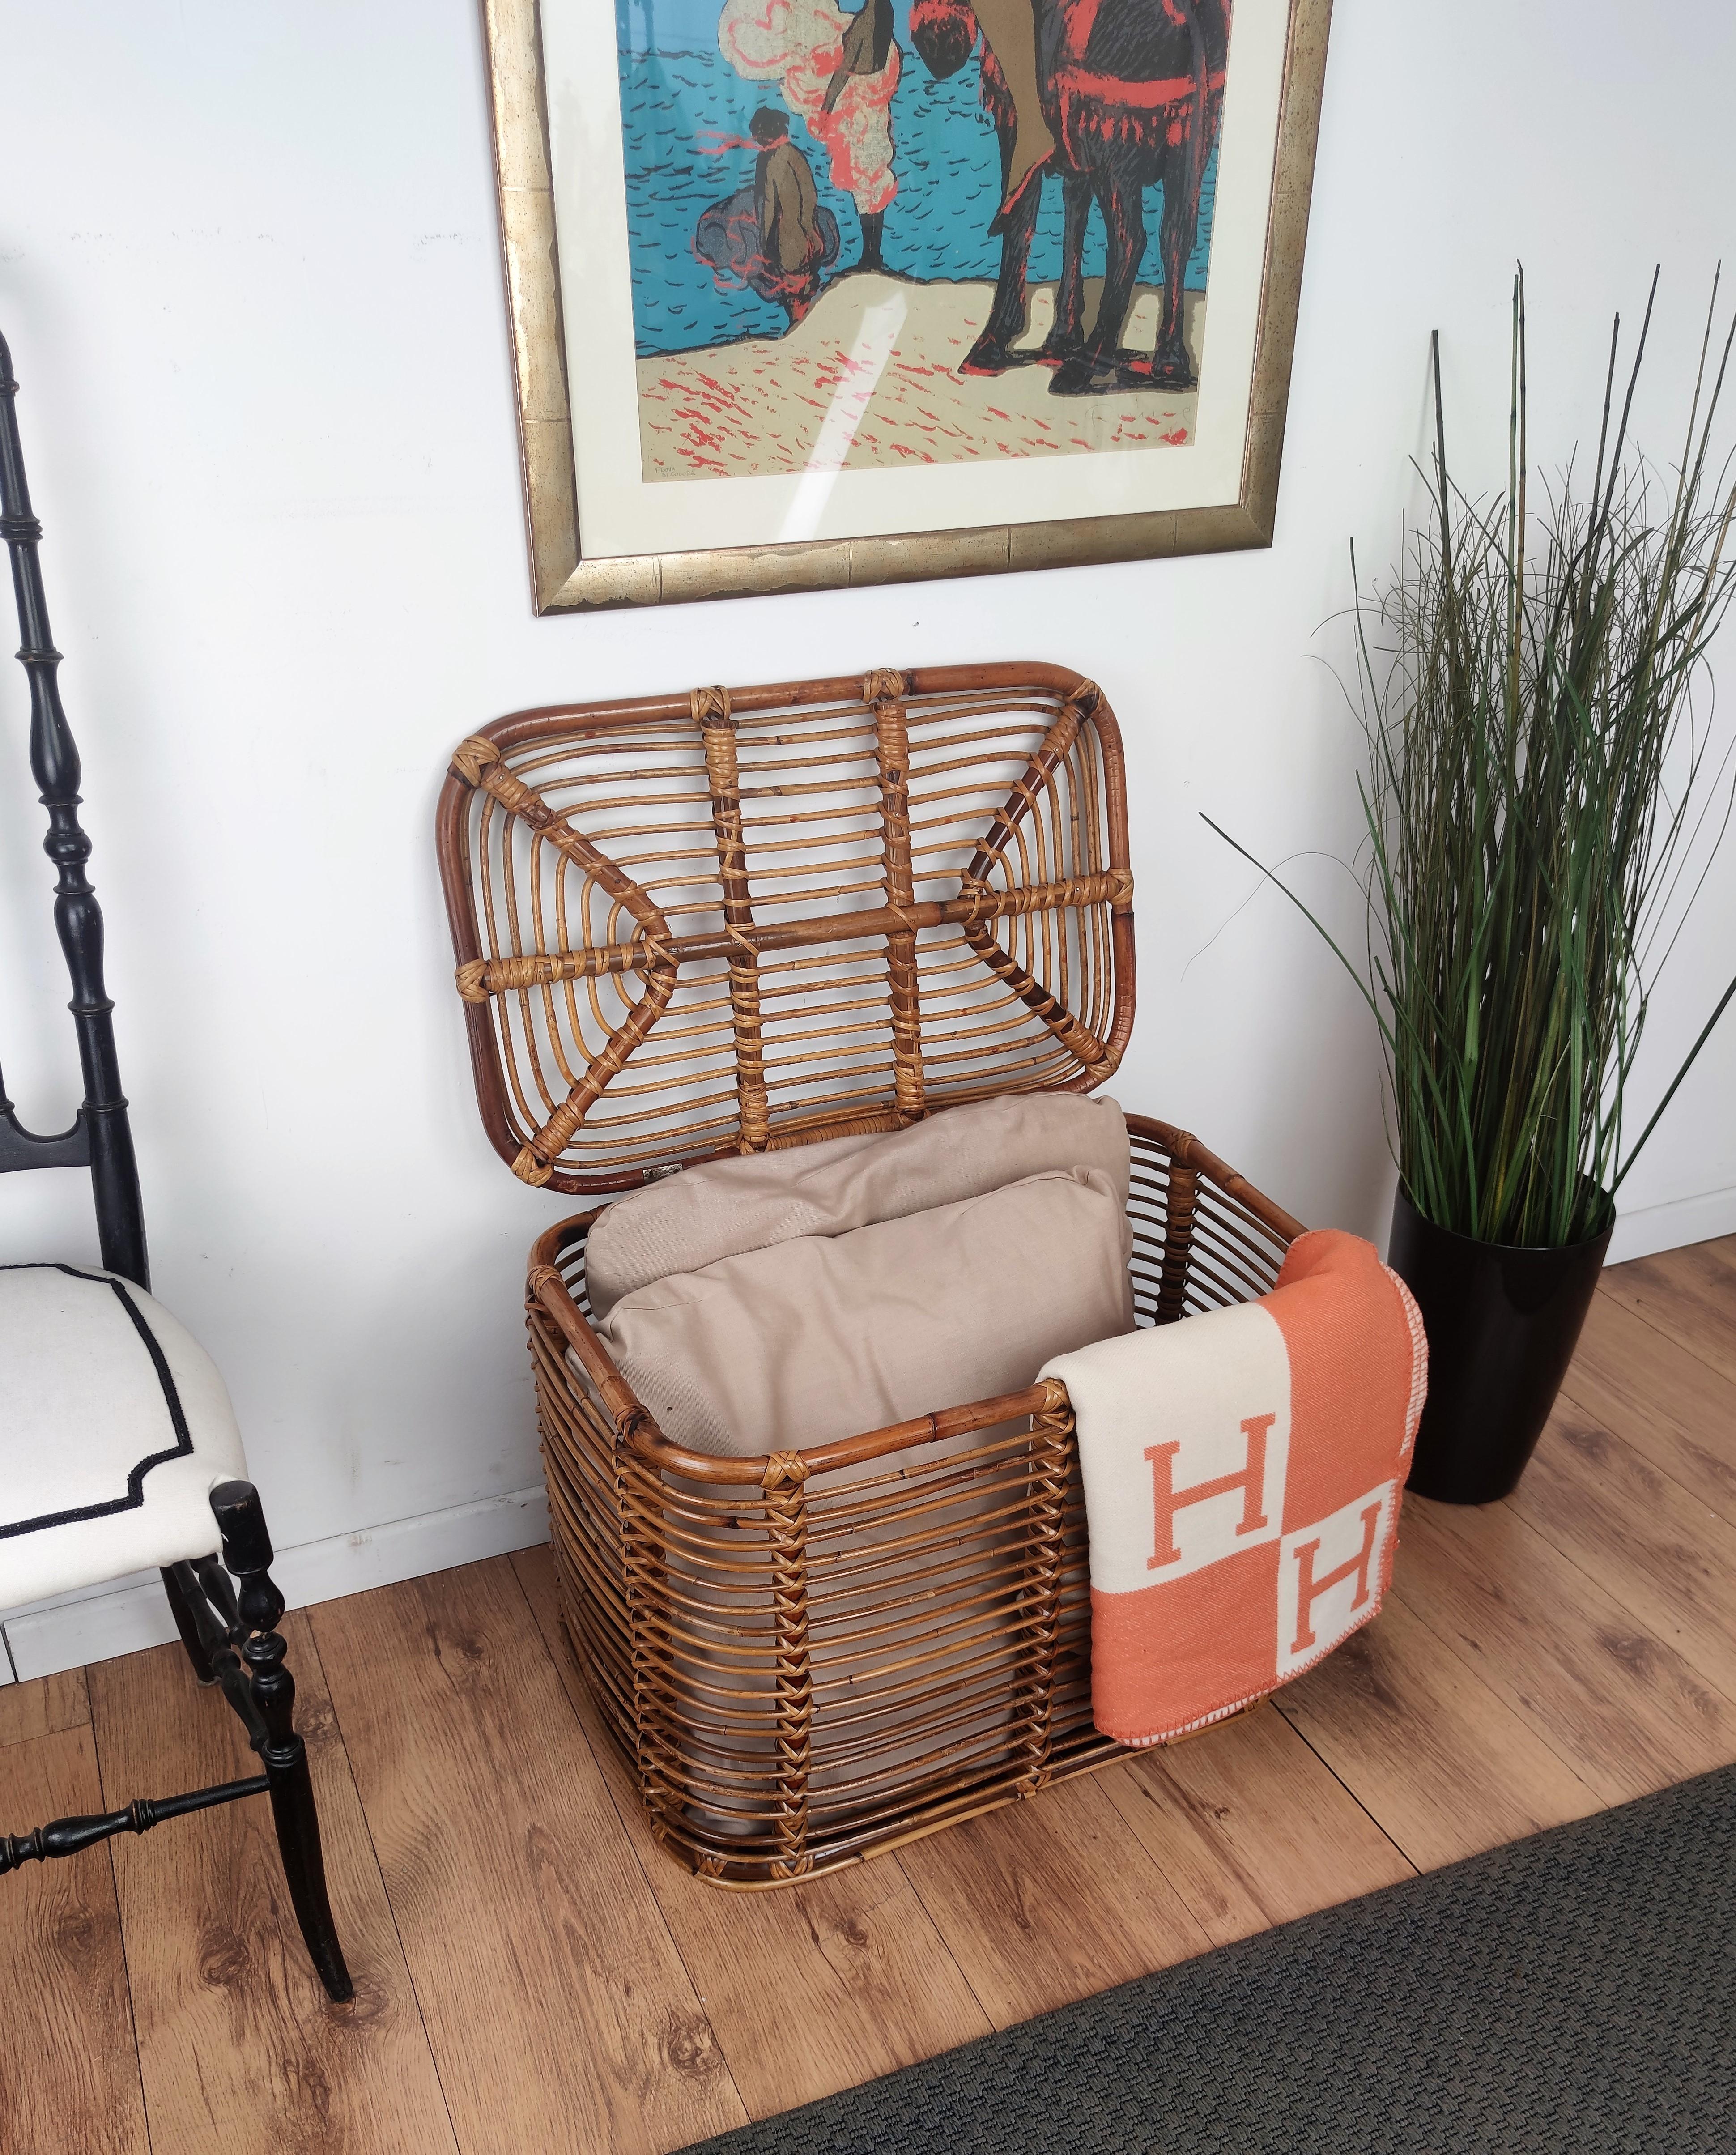 Beautiful 1960s Italian Mid-Century Modern basket or container, perfect in any next to a sofa or in a bedroom as pillow or blanket storage as well as in any bathroom as bathrobe and towels. This charming piece is in the typical style of Audoux and